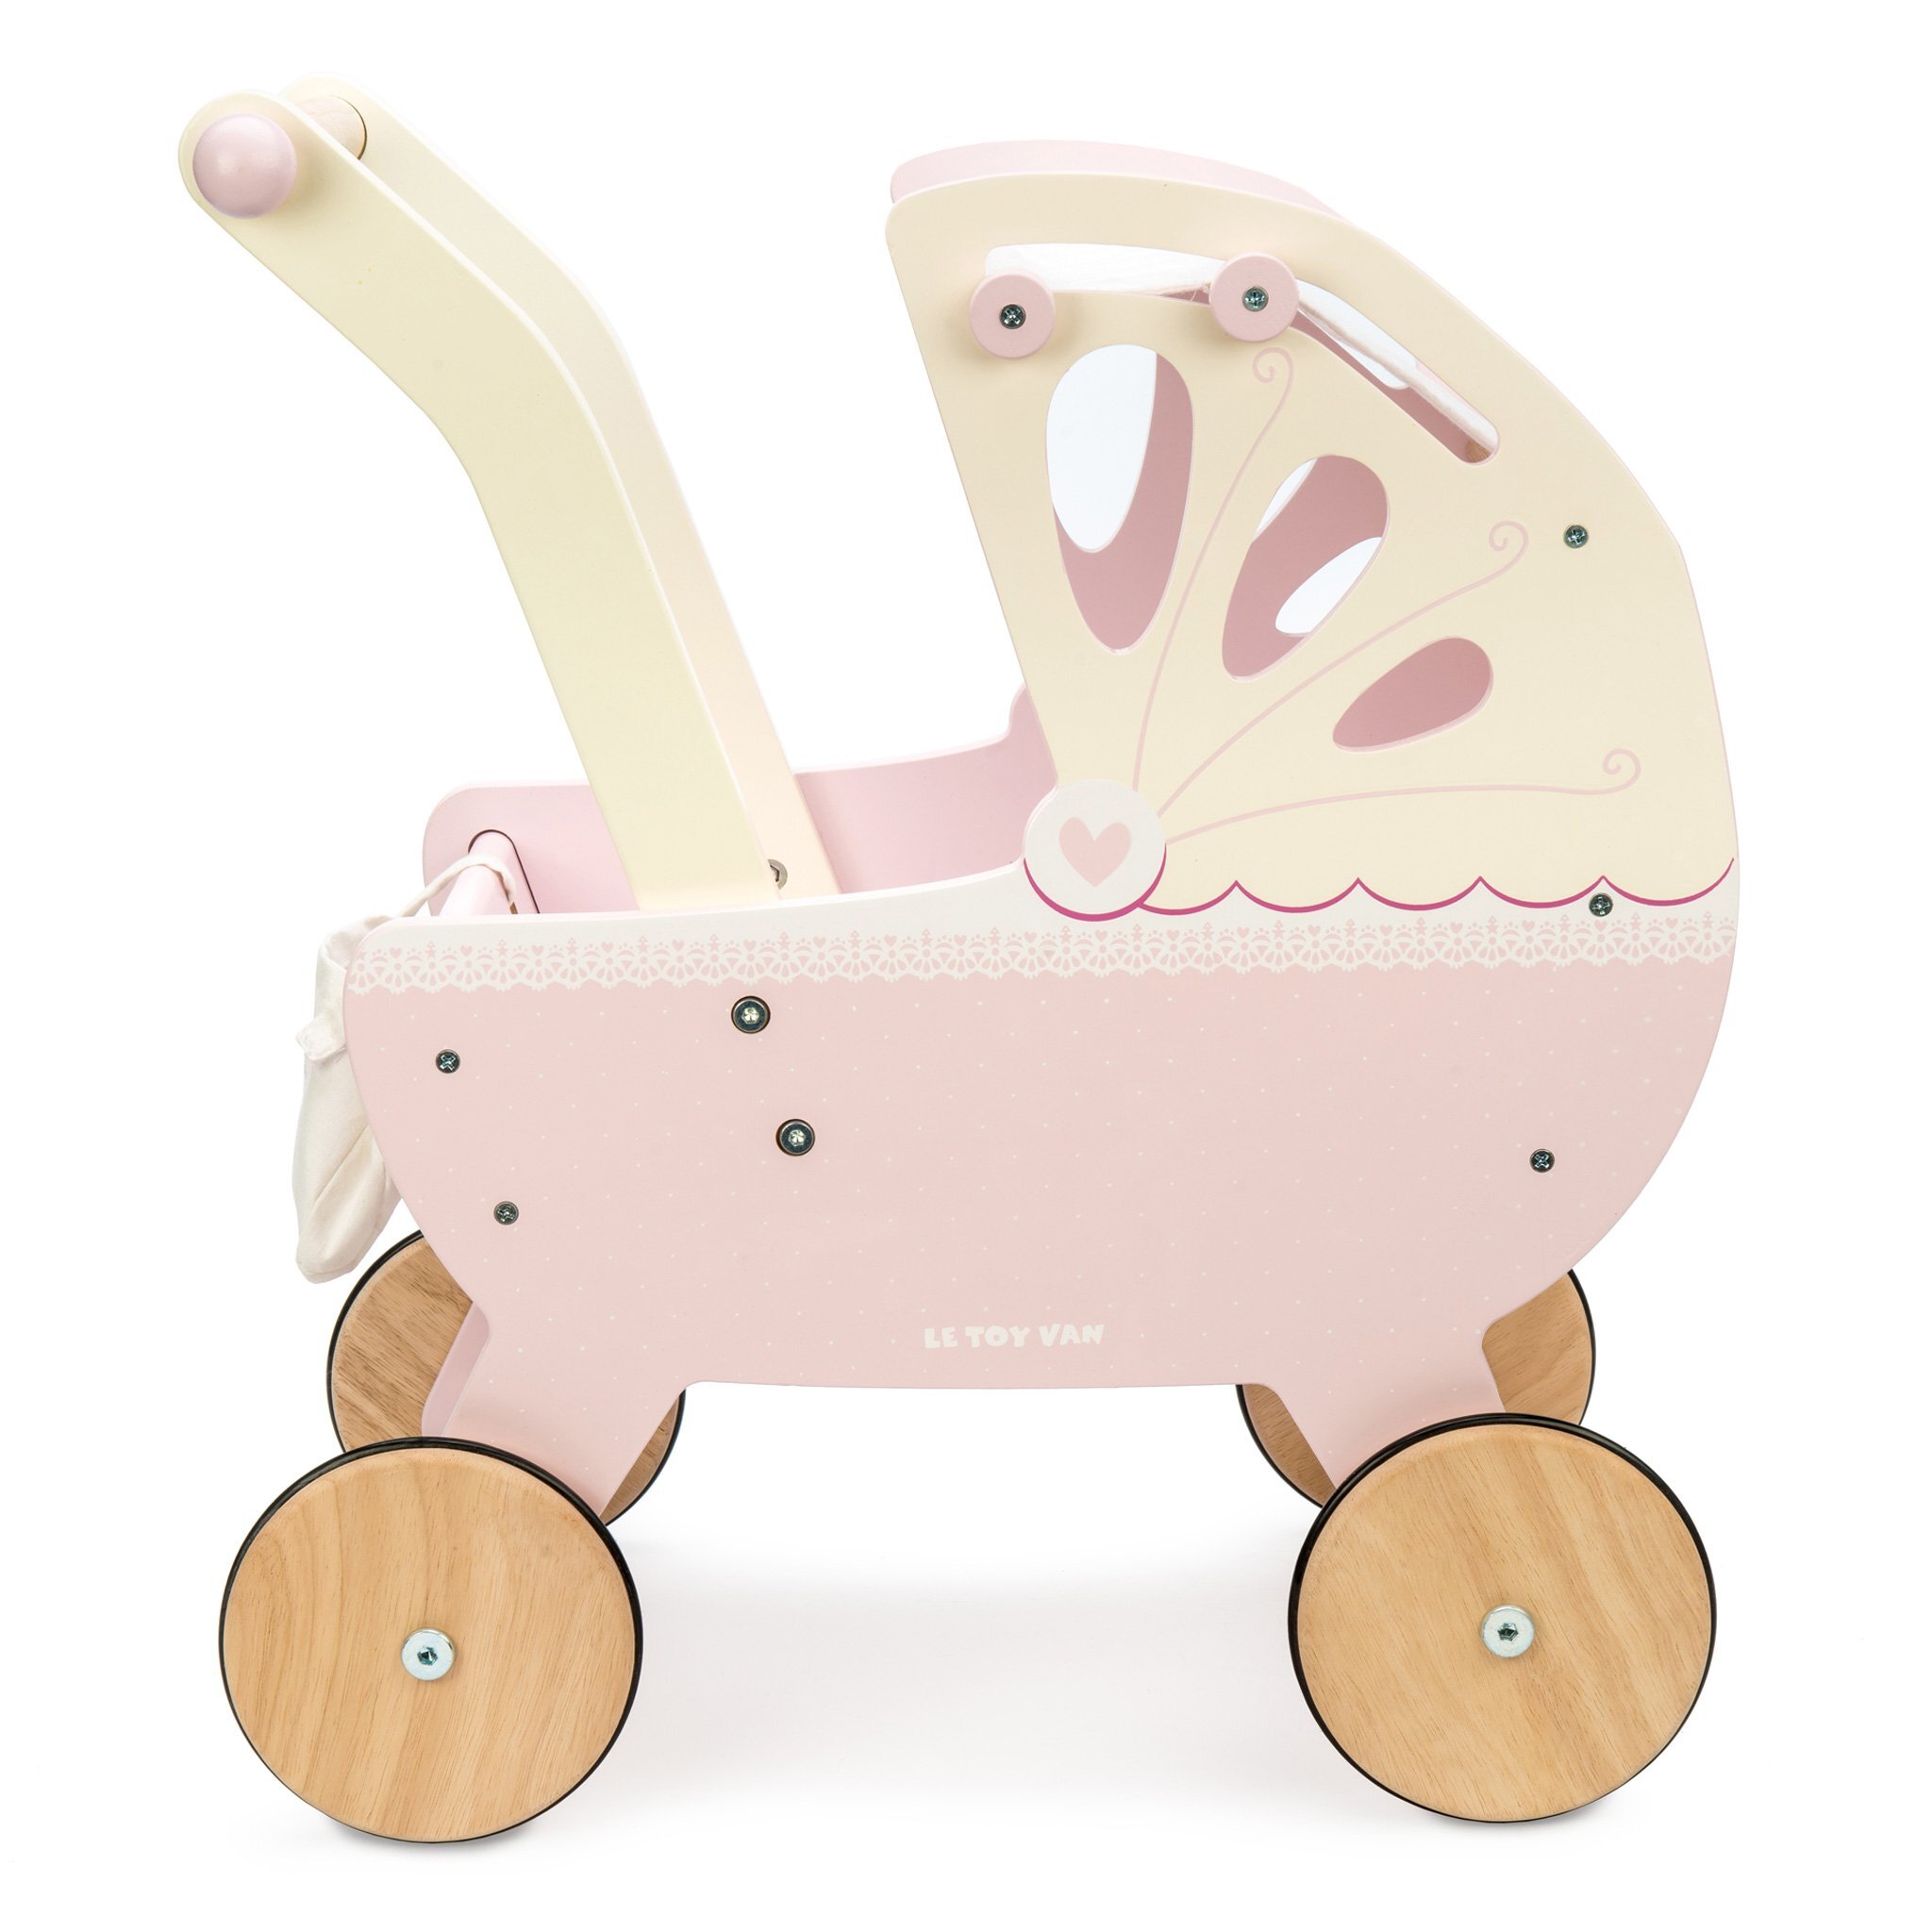 dolly buggy